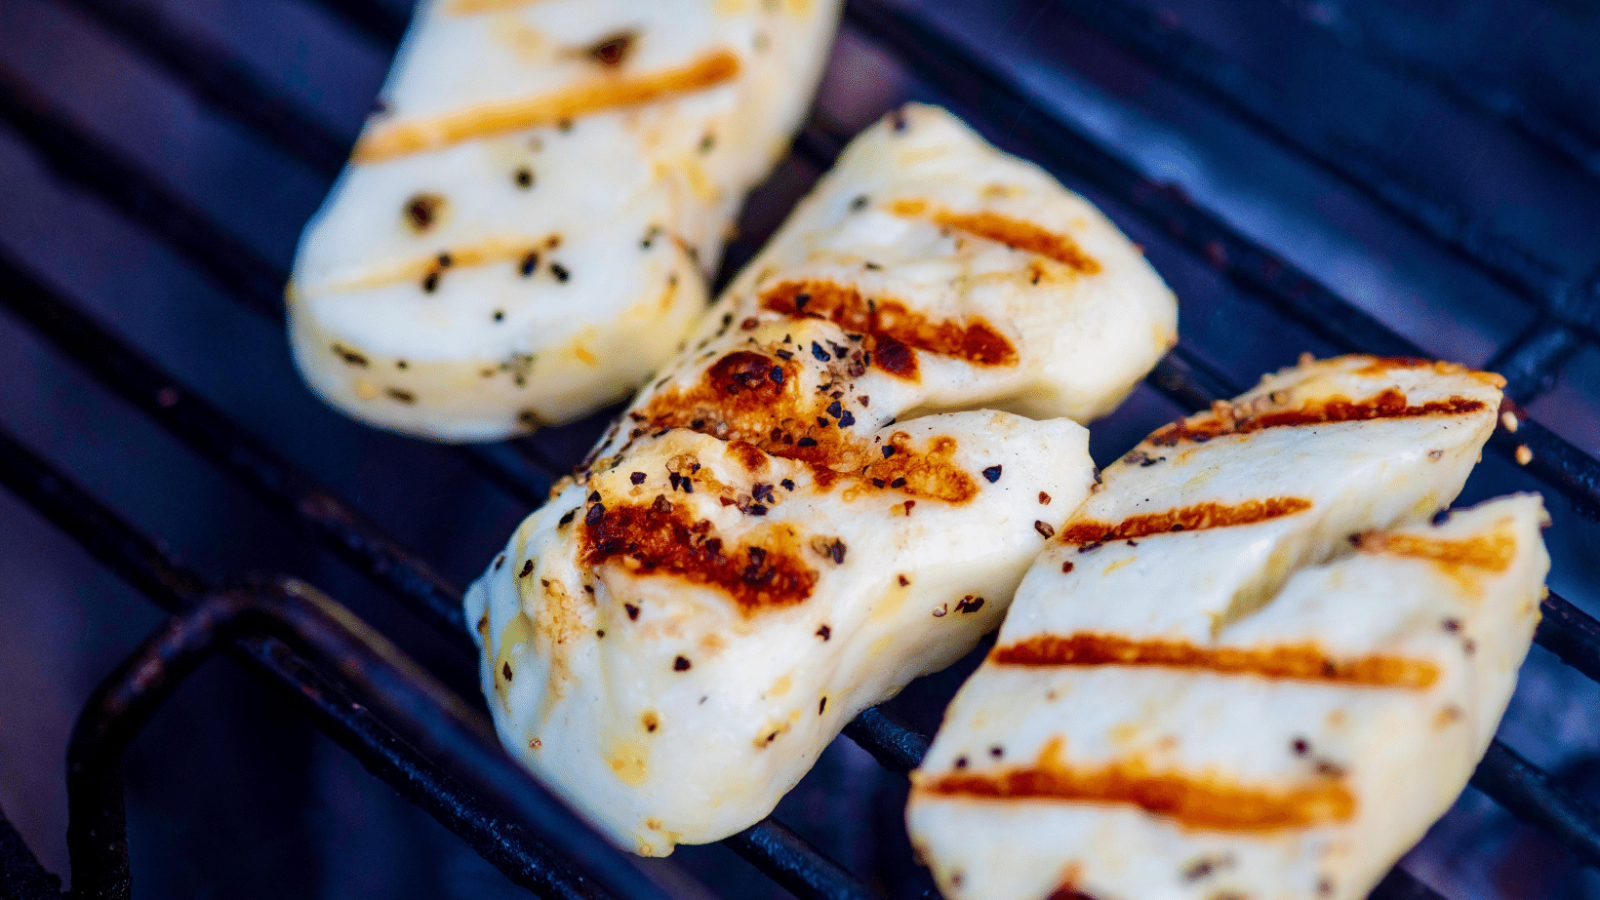 Image of Quick Halloumi Cheesemaking Recipe with Cow's Milk